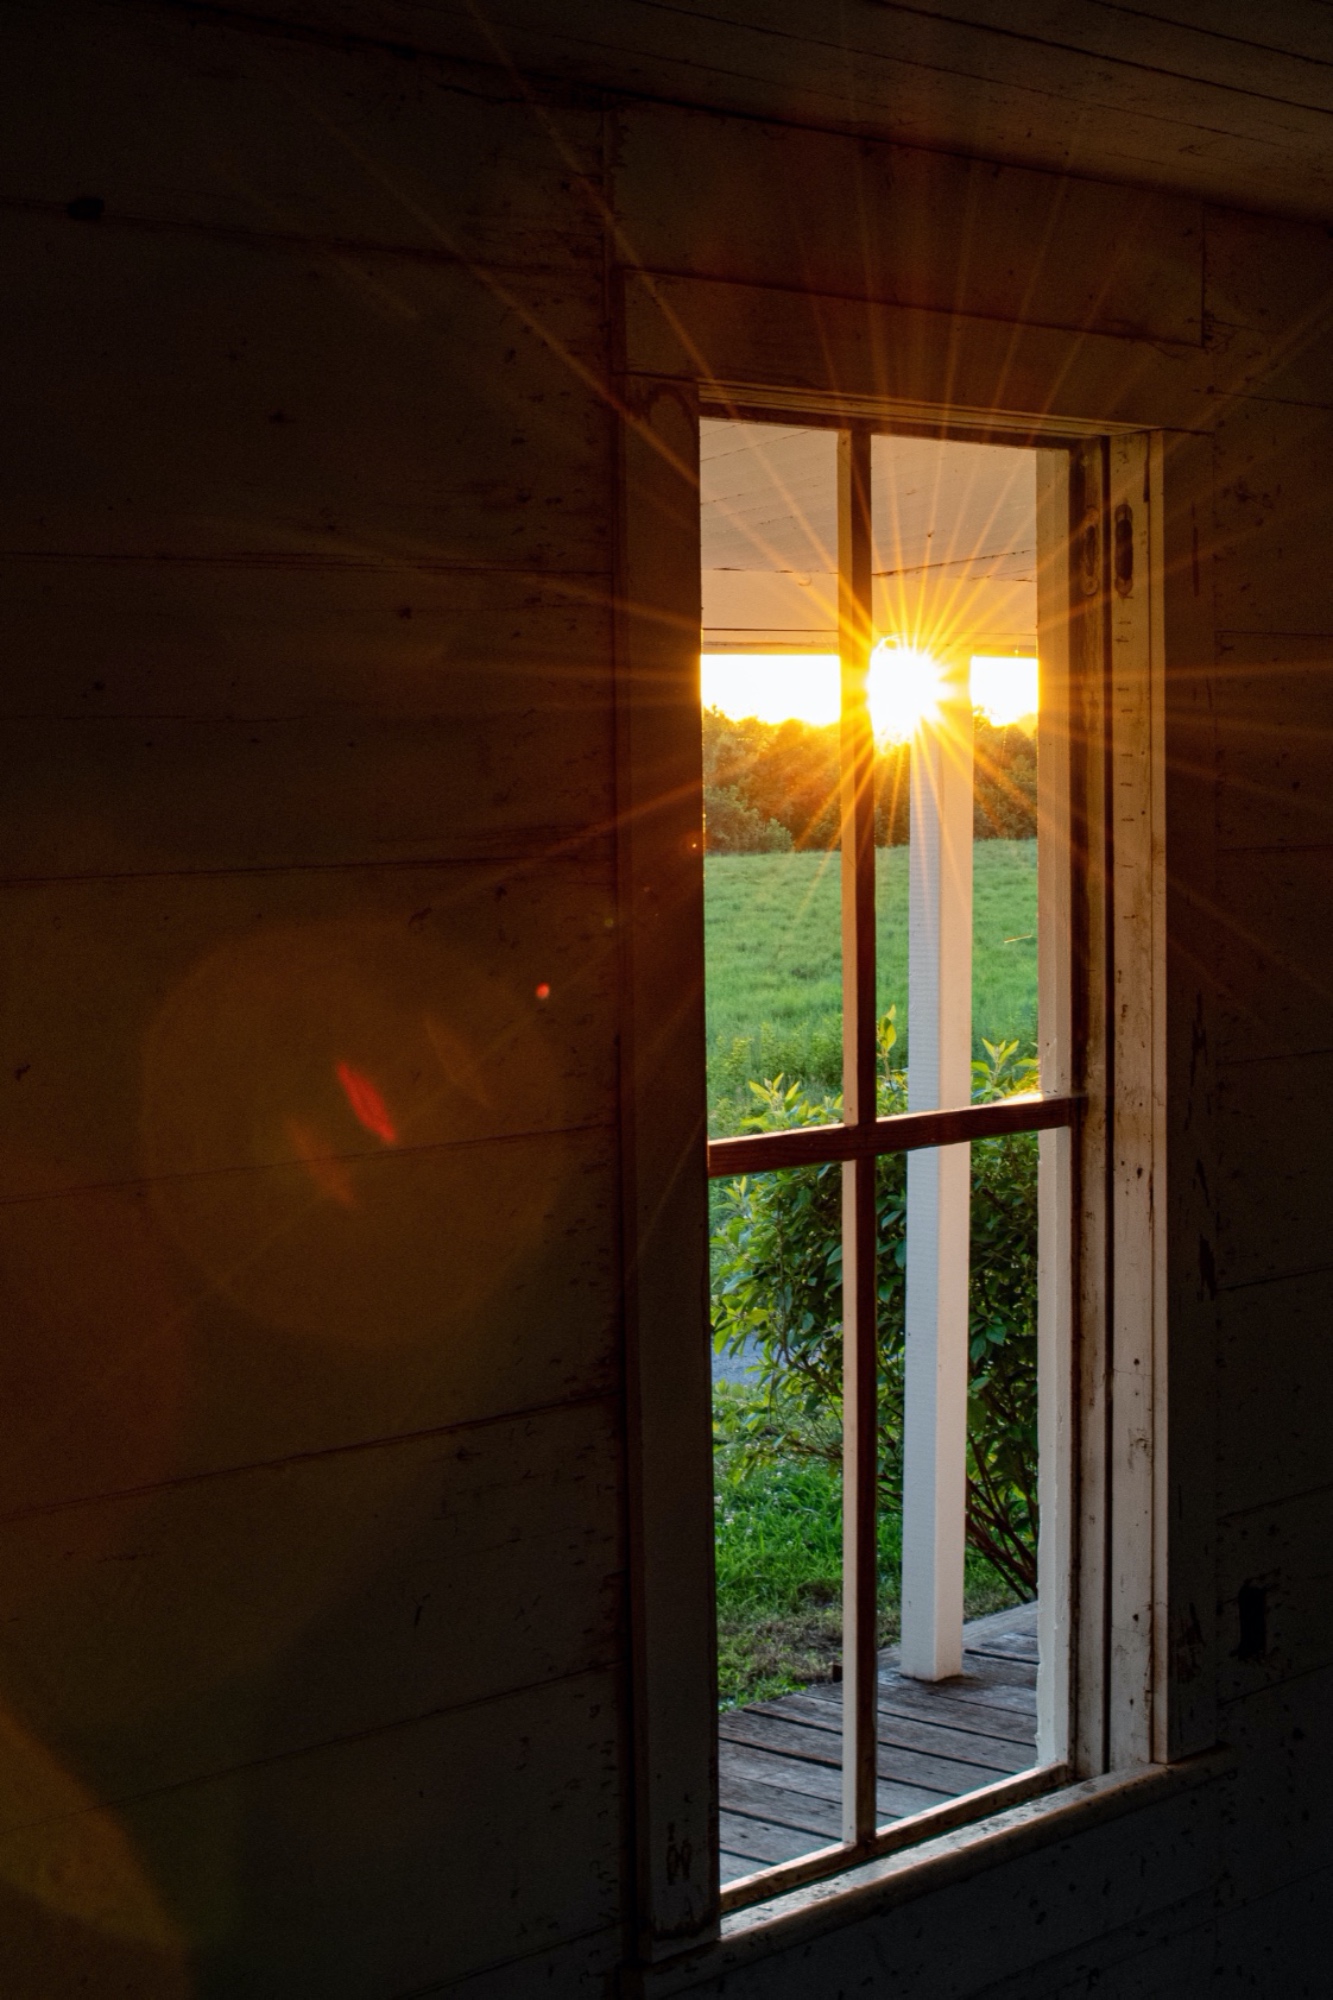 The Photo shows a window, through which a setting sun can be seen, over low crops in a field.